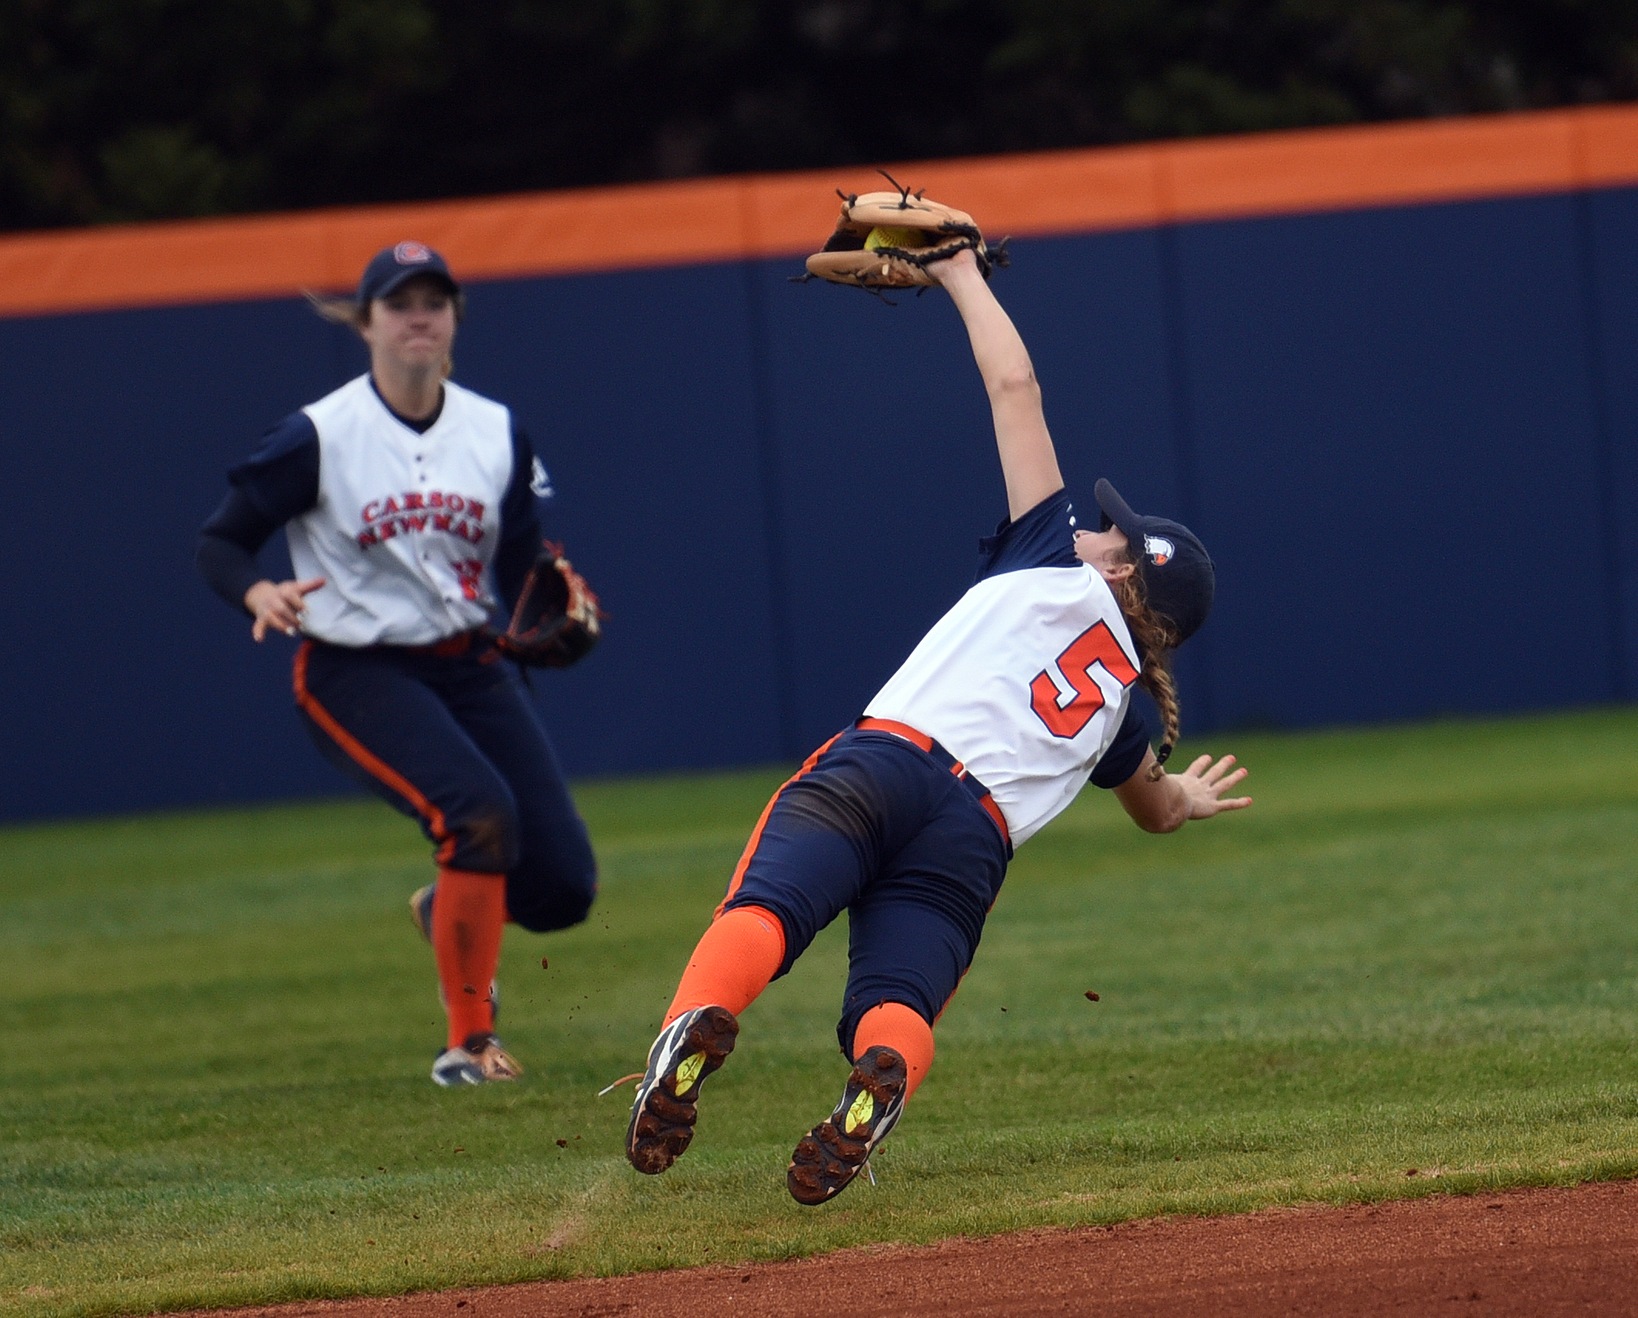 After rainout, Carson-Newman and Georgia College try again for doubleheader